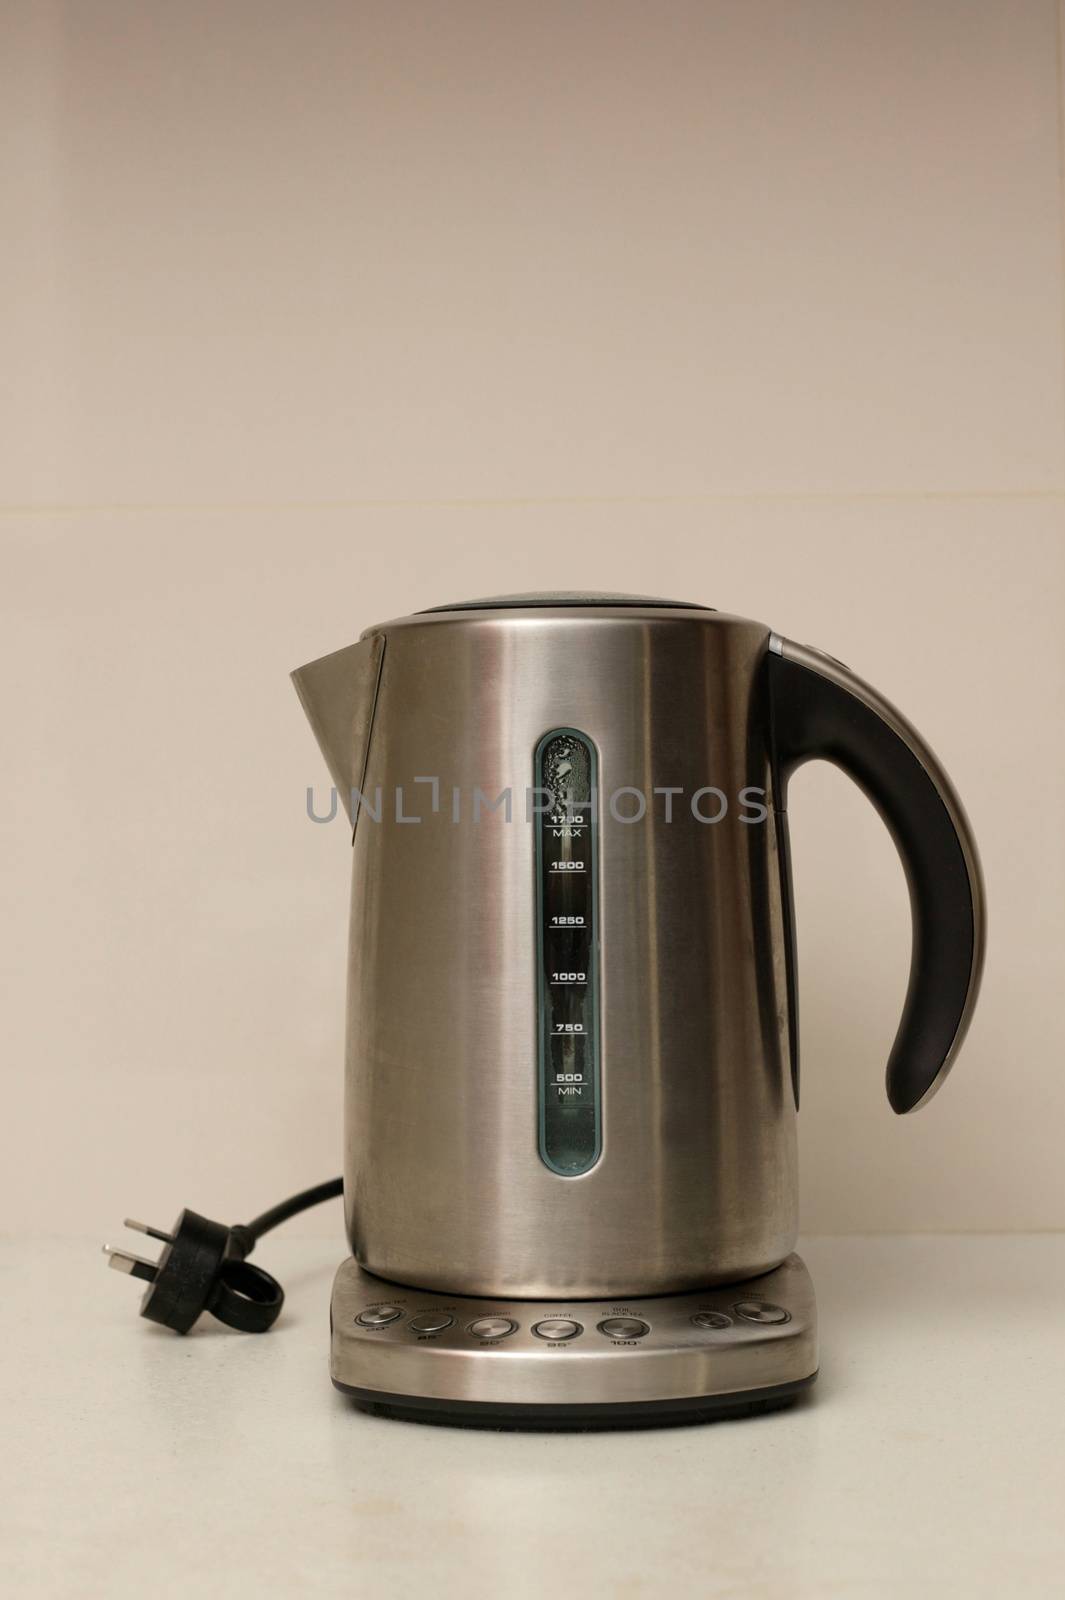 Kettle by Kitch